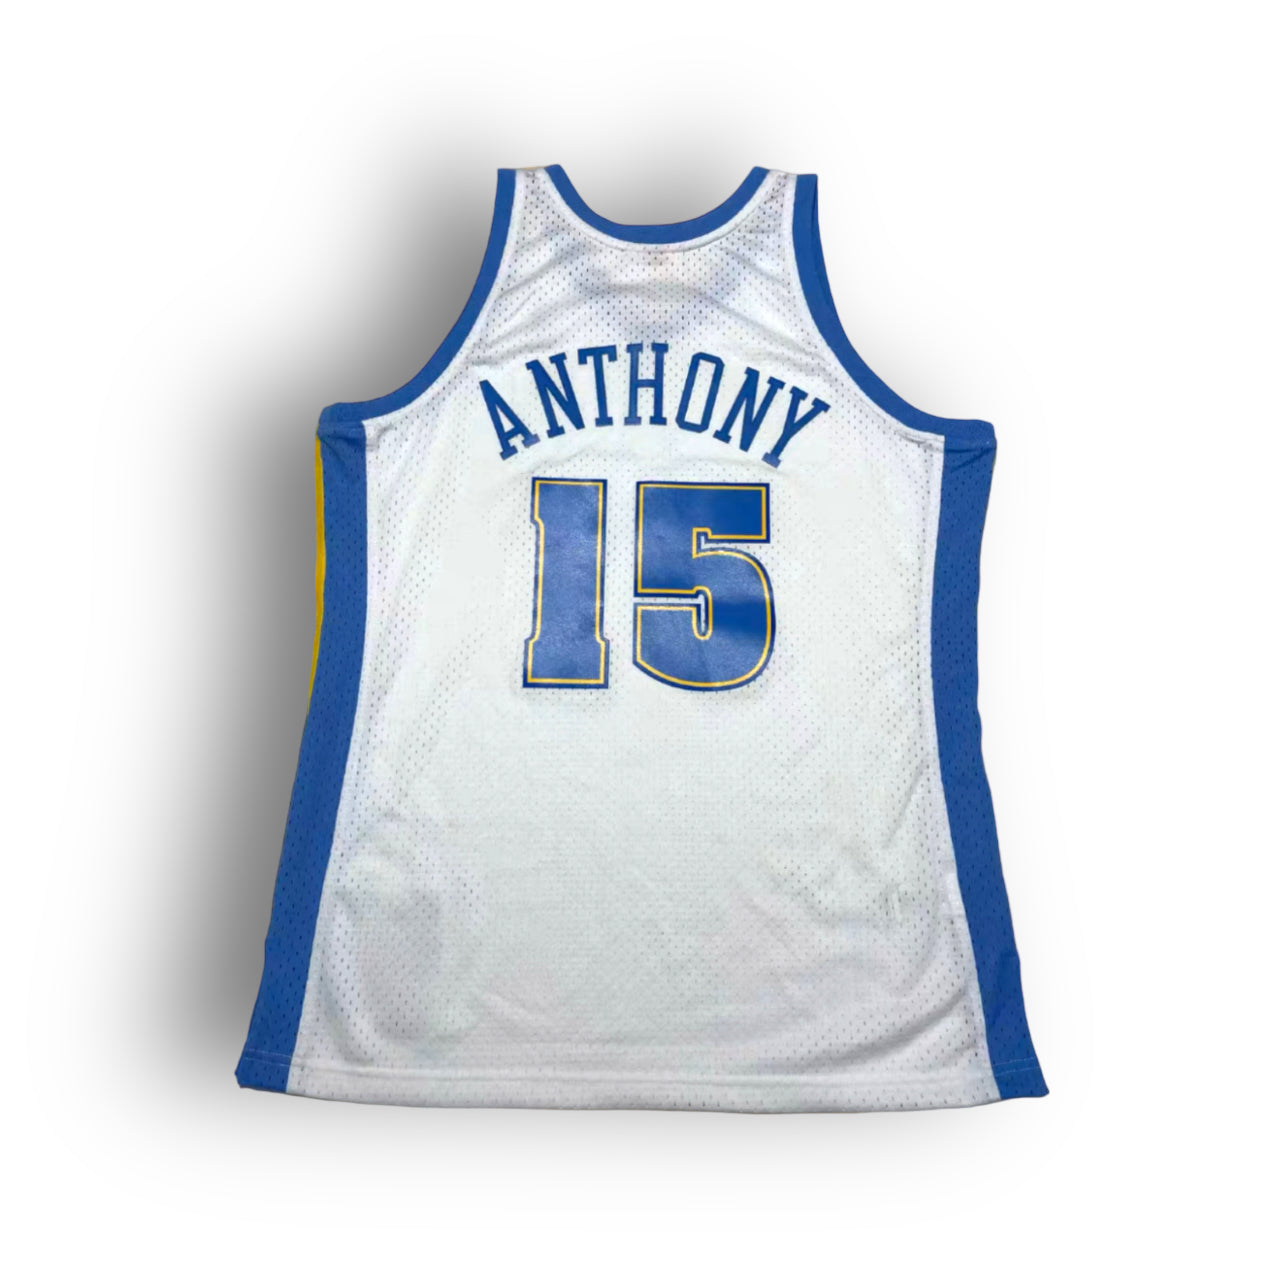 Carmelo Anthony 2006-2007 Denver Nuggets Home Mitchell & Ness Swingman Jersey - White - Hoop Jersey Store